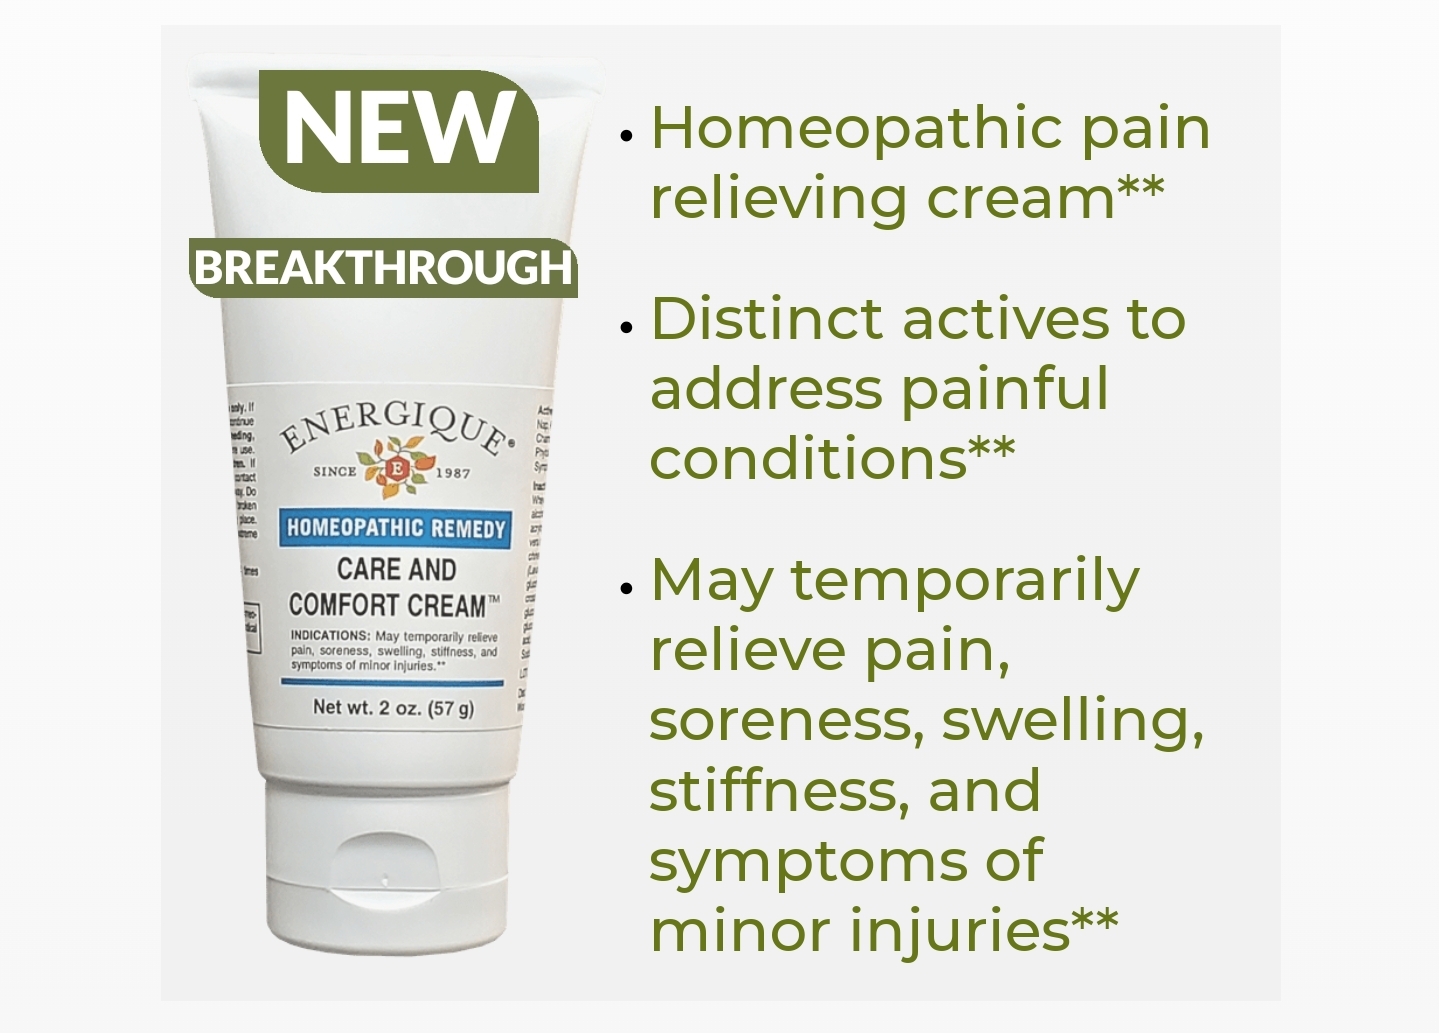 FREE Full Size Sample Of Care And Comfort Cream